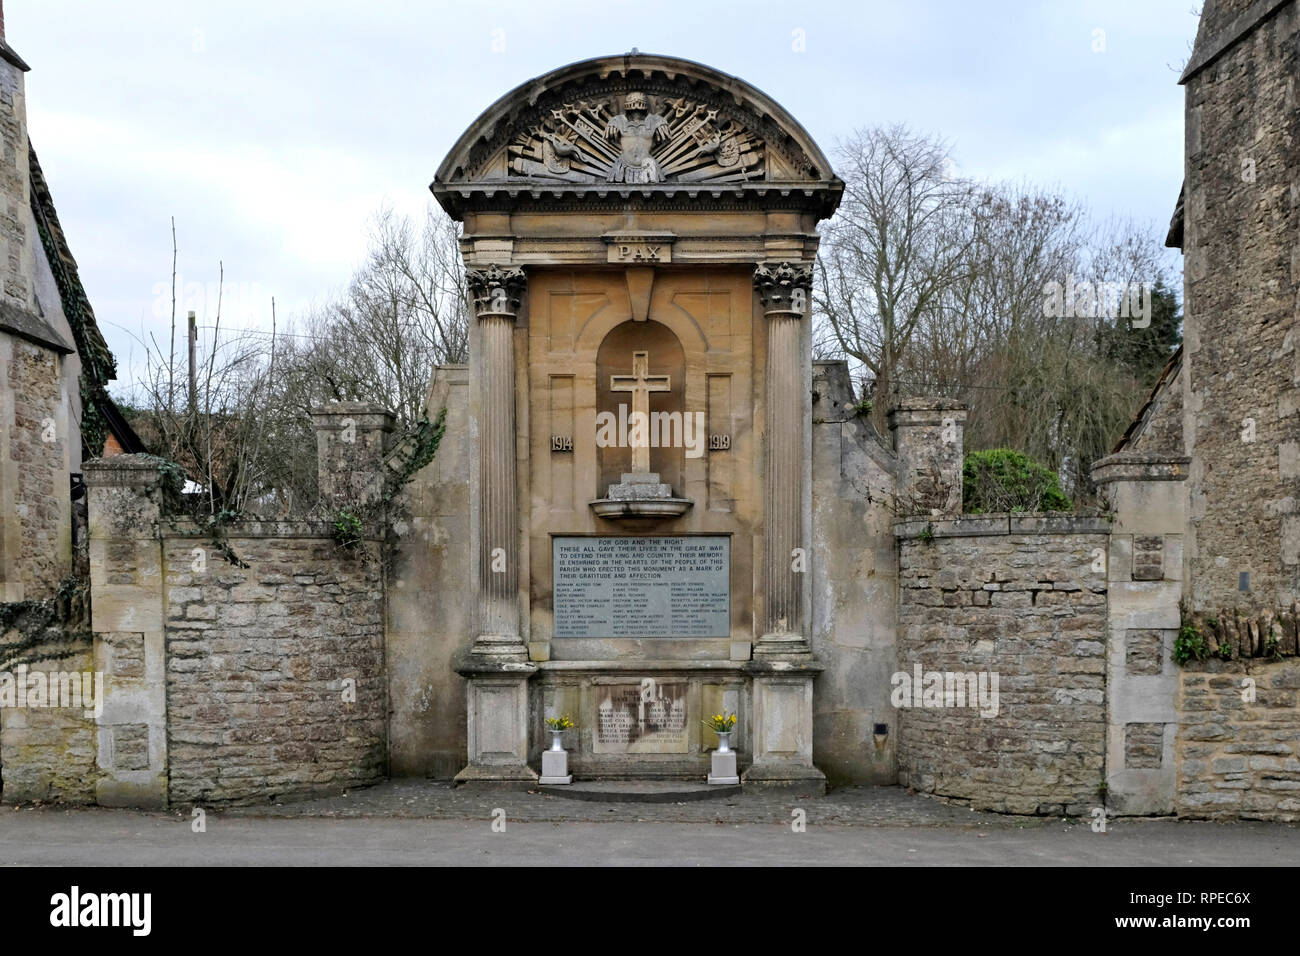 A First World War memorial in Roman style in Lacock, Wiltshire, UK. Stock Photo